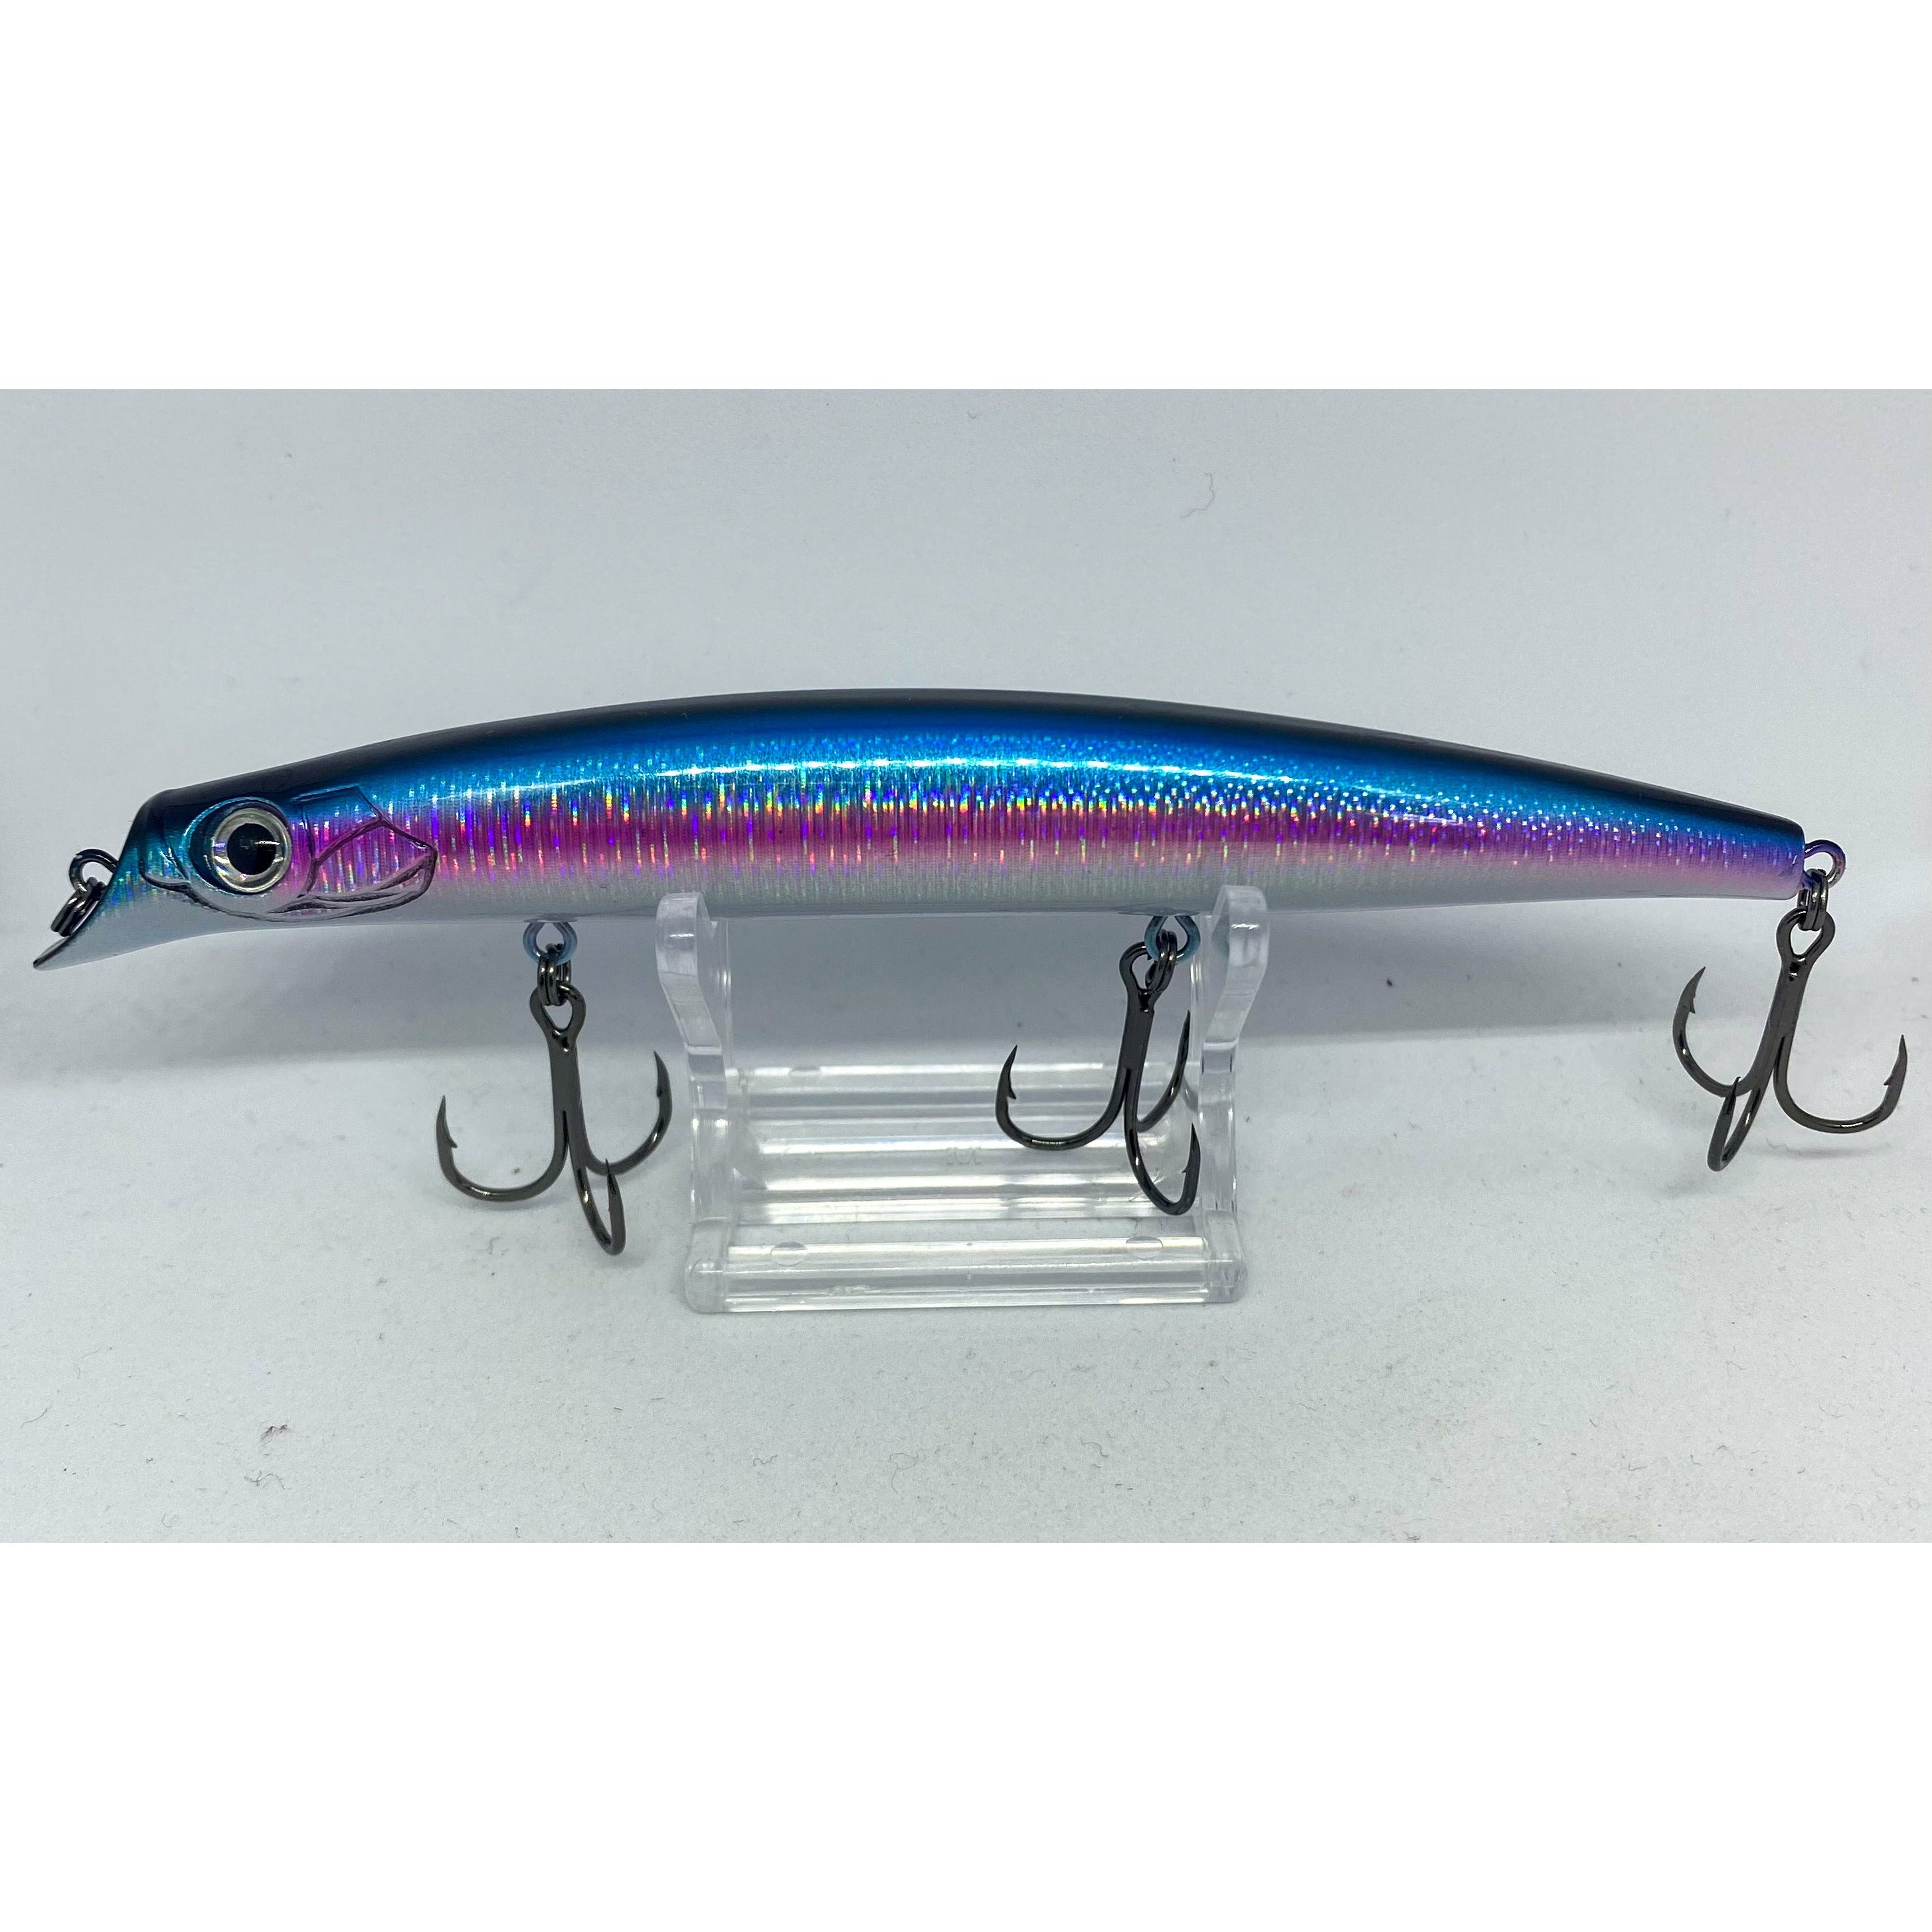 Large Shallow Diving 1m Lure 140mm 18g